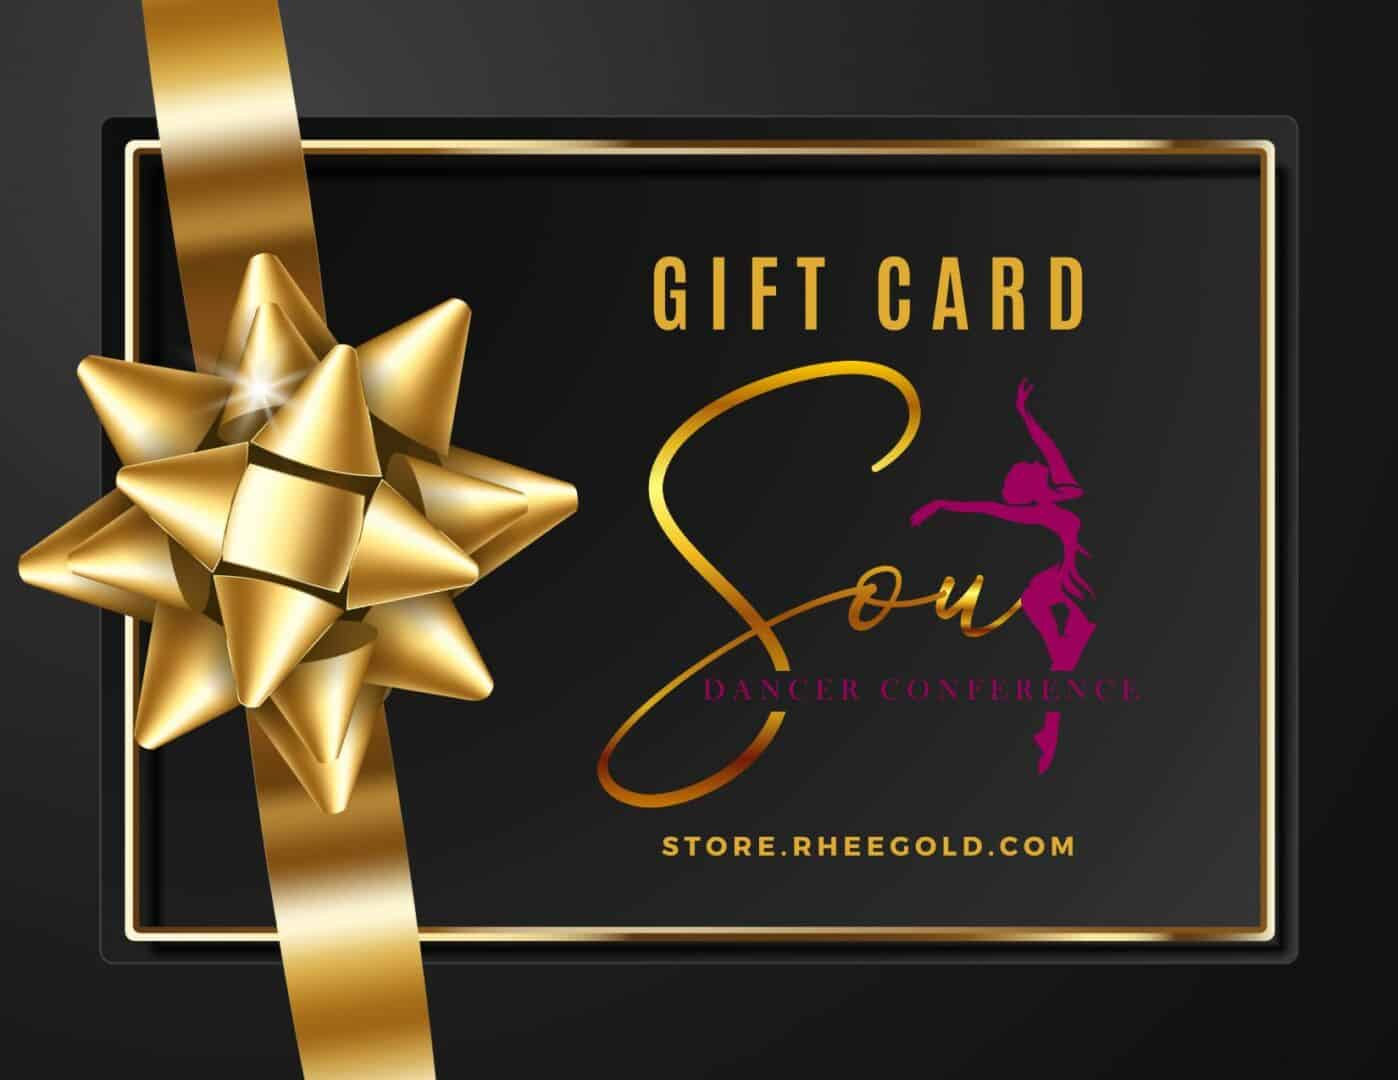 Black Friday Gift Cards